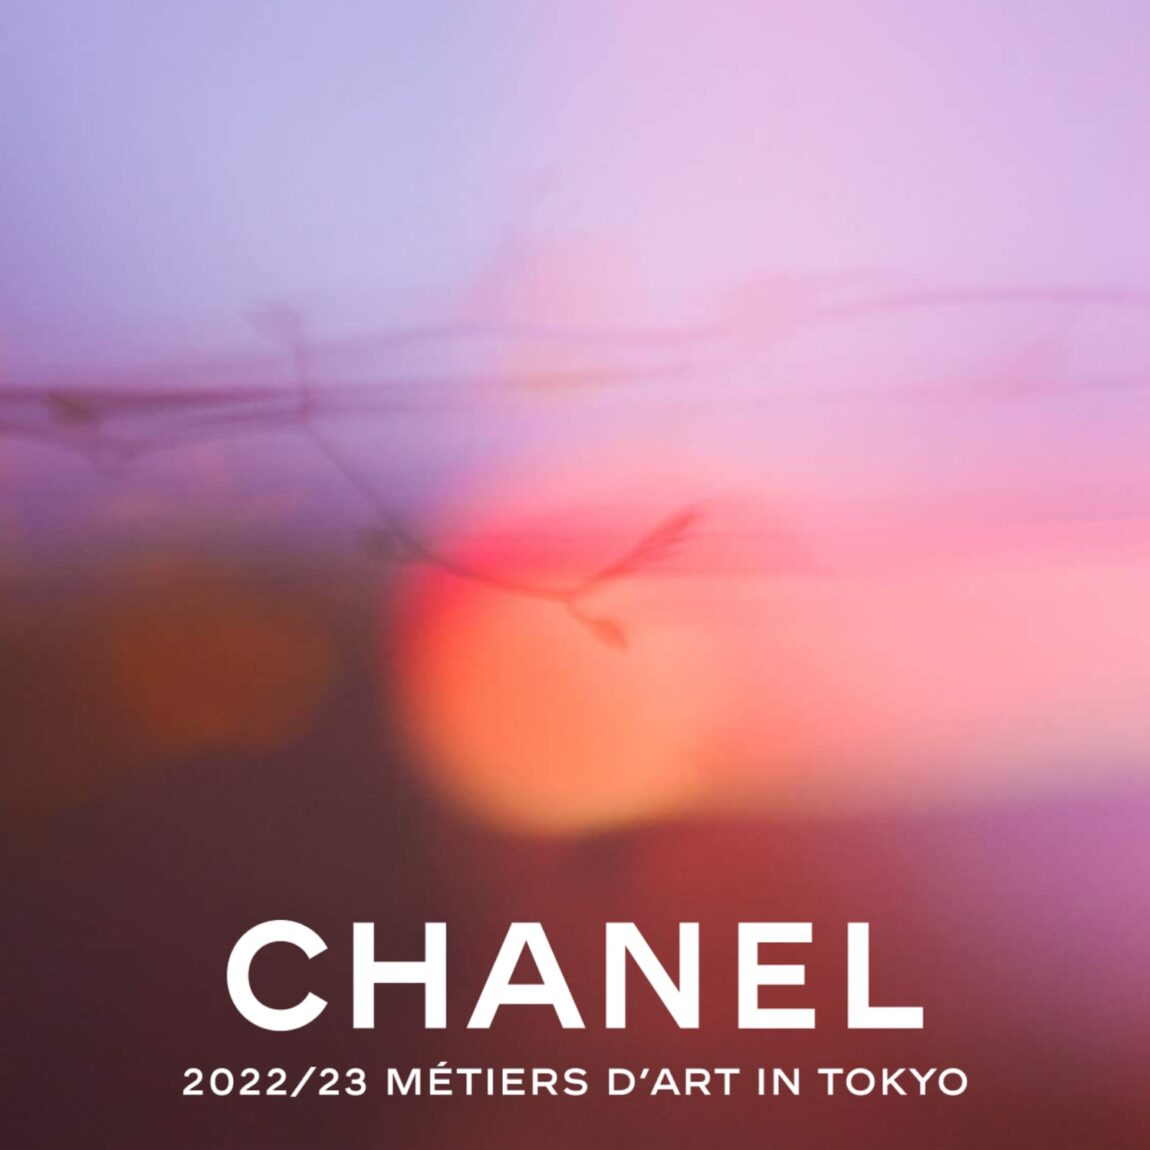 CHANEL - The 2022/23 Métiers d'art collection in Tokyo - ZOE Magazine